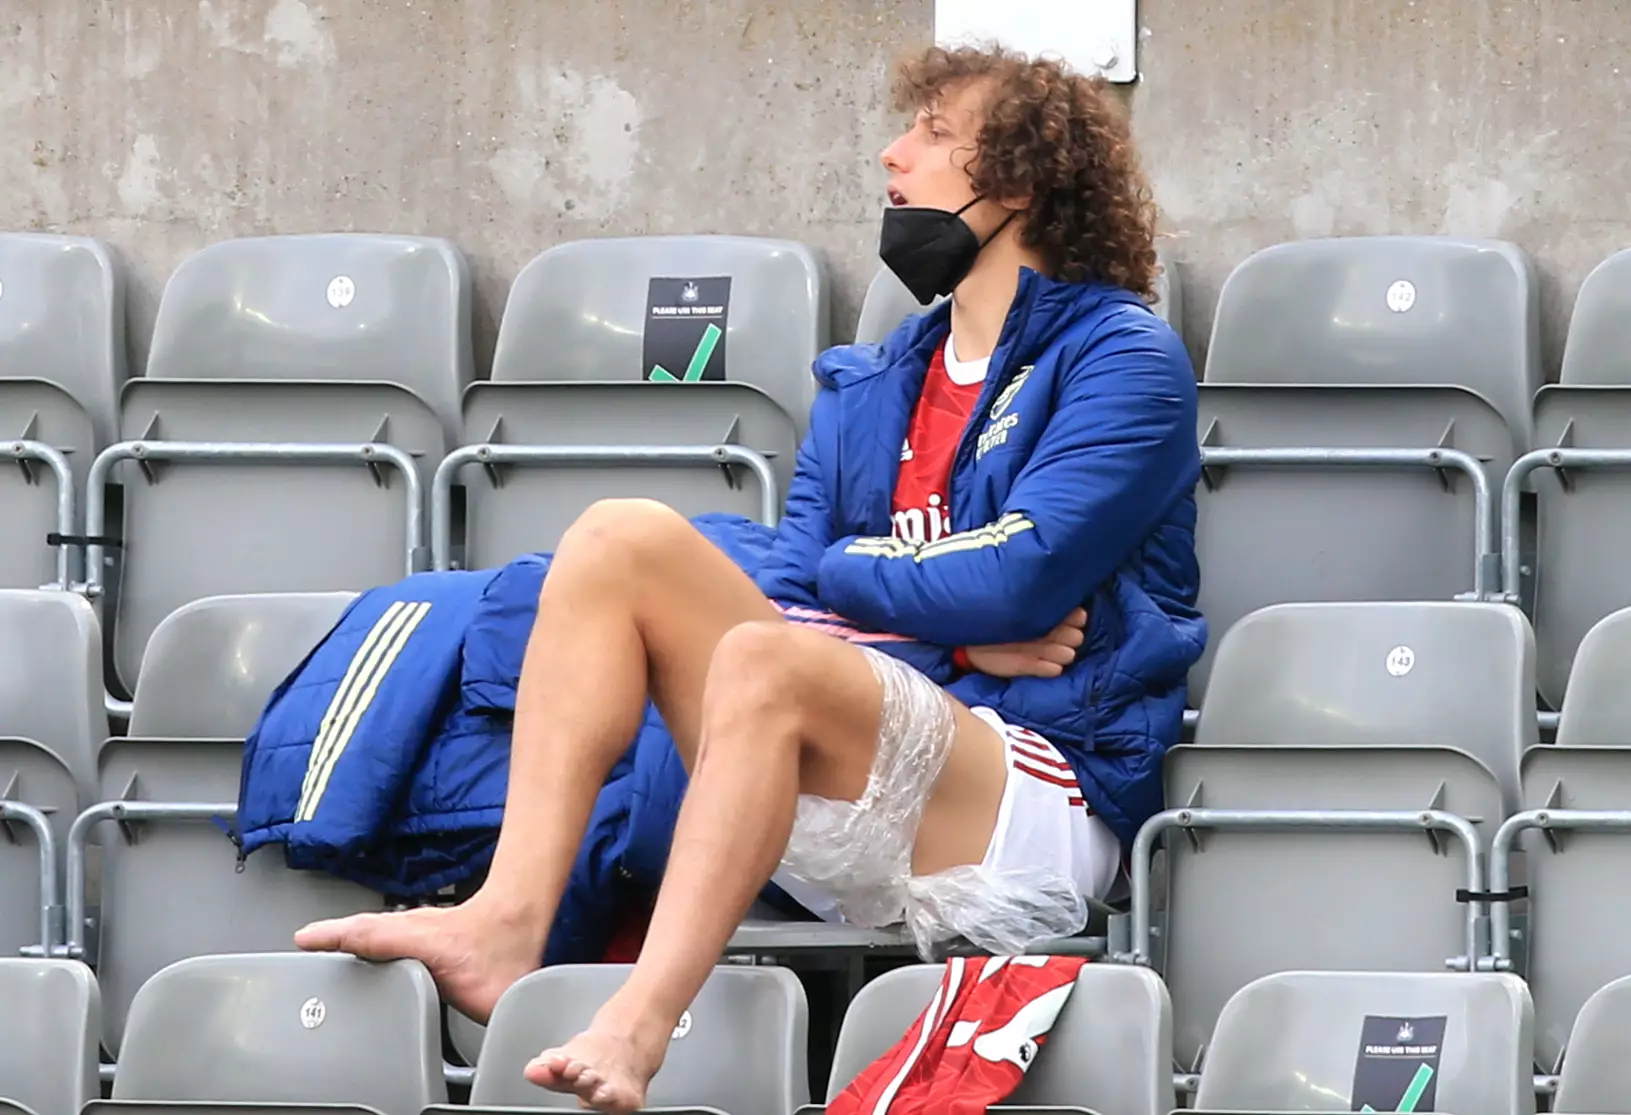 Luiz has had to sit out the end of the season with an injury. Image: PA Images